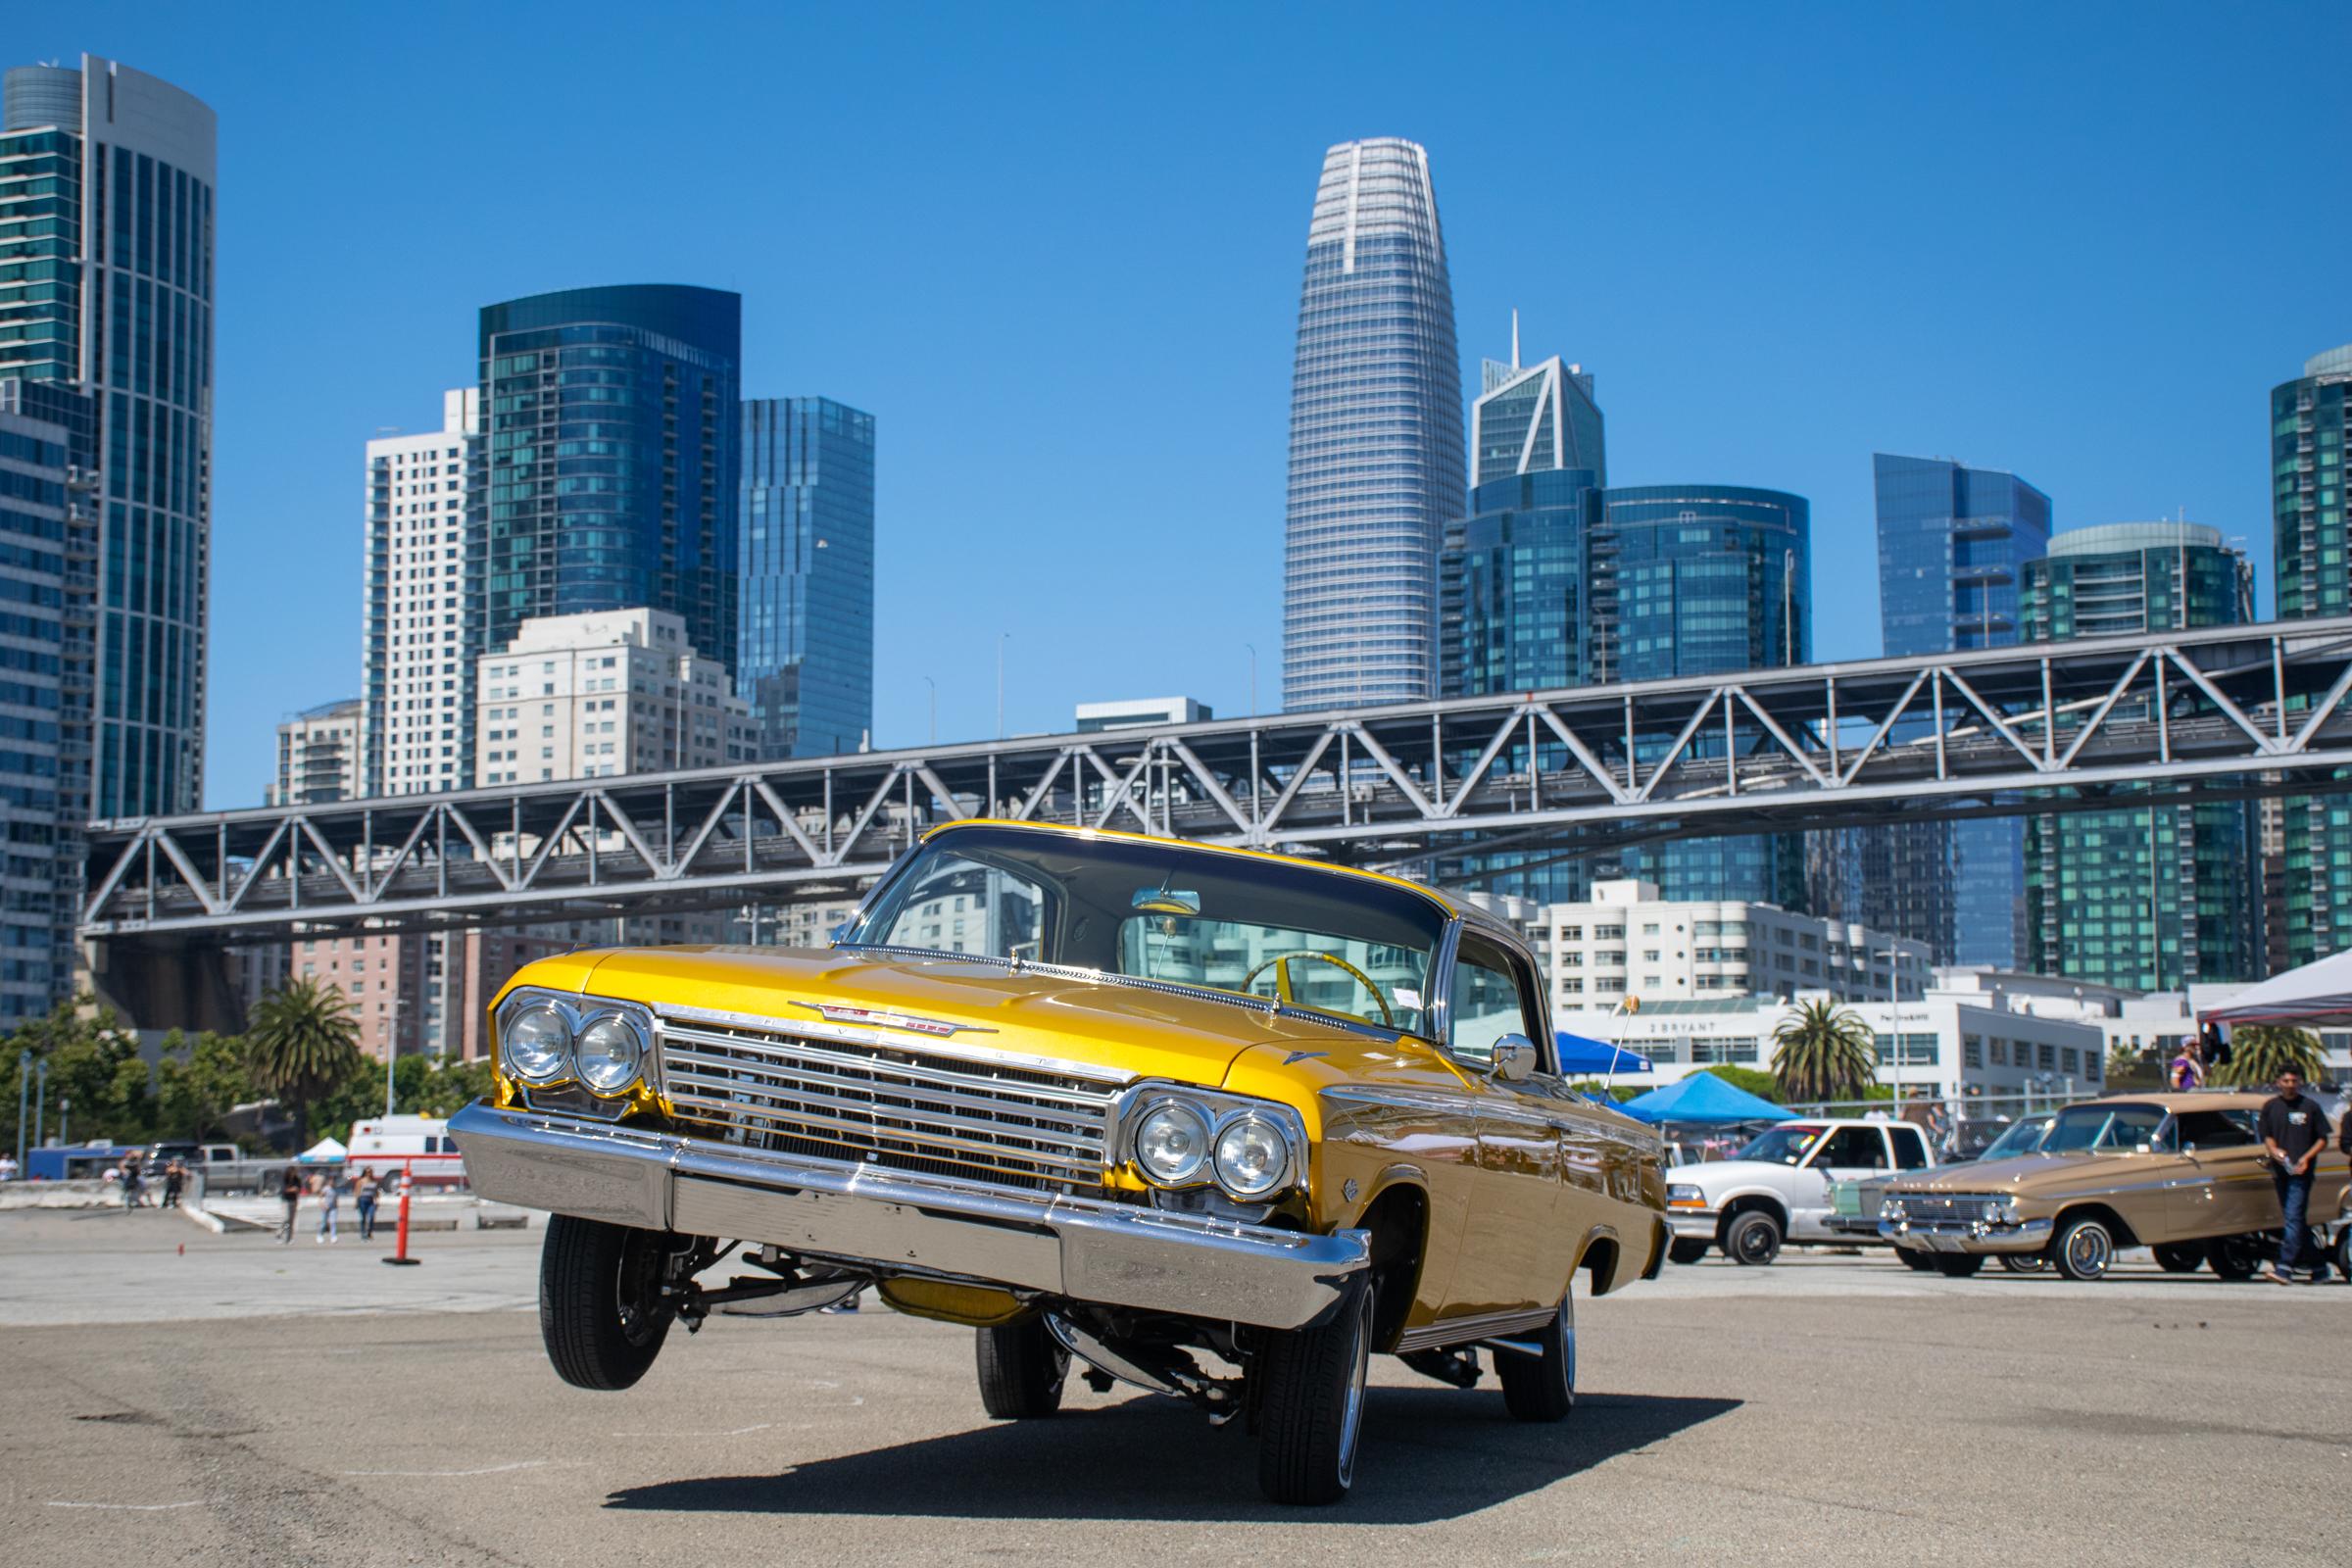 A 1962 gold Impala is displayed in the pit before the hopping contest. San Francisco, California. August 20, 2022. Photo by Karem Rodriguez.